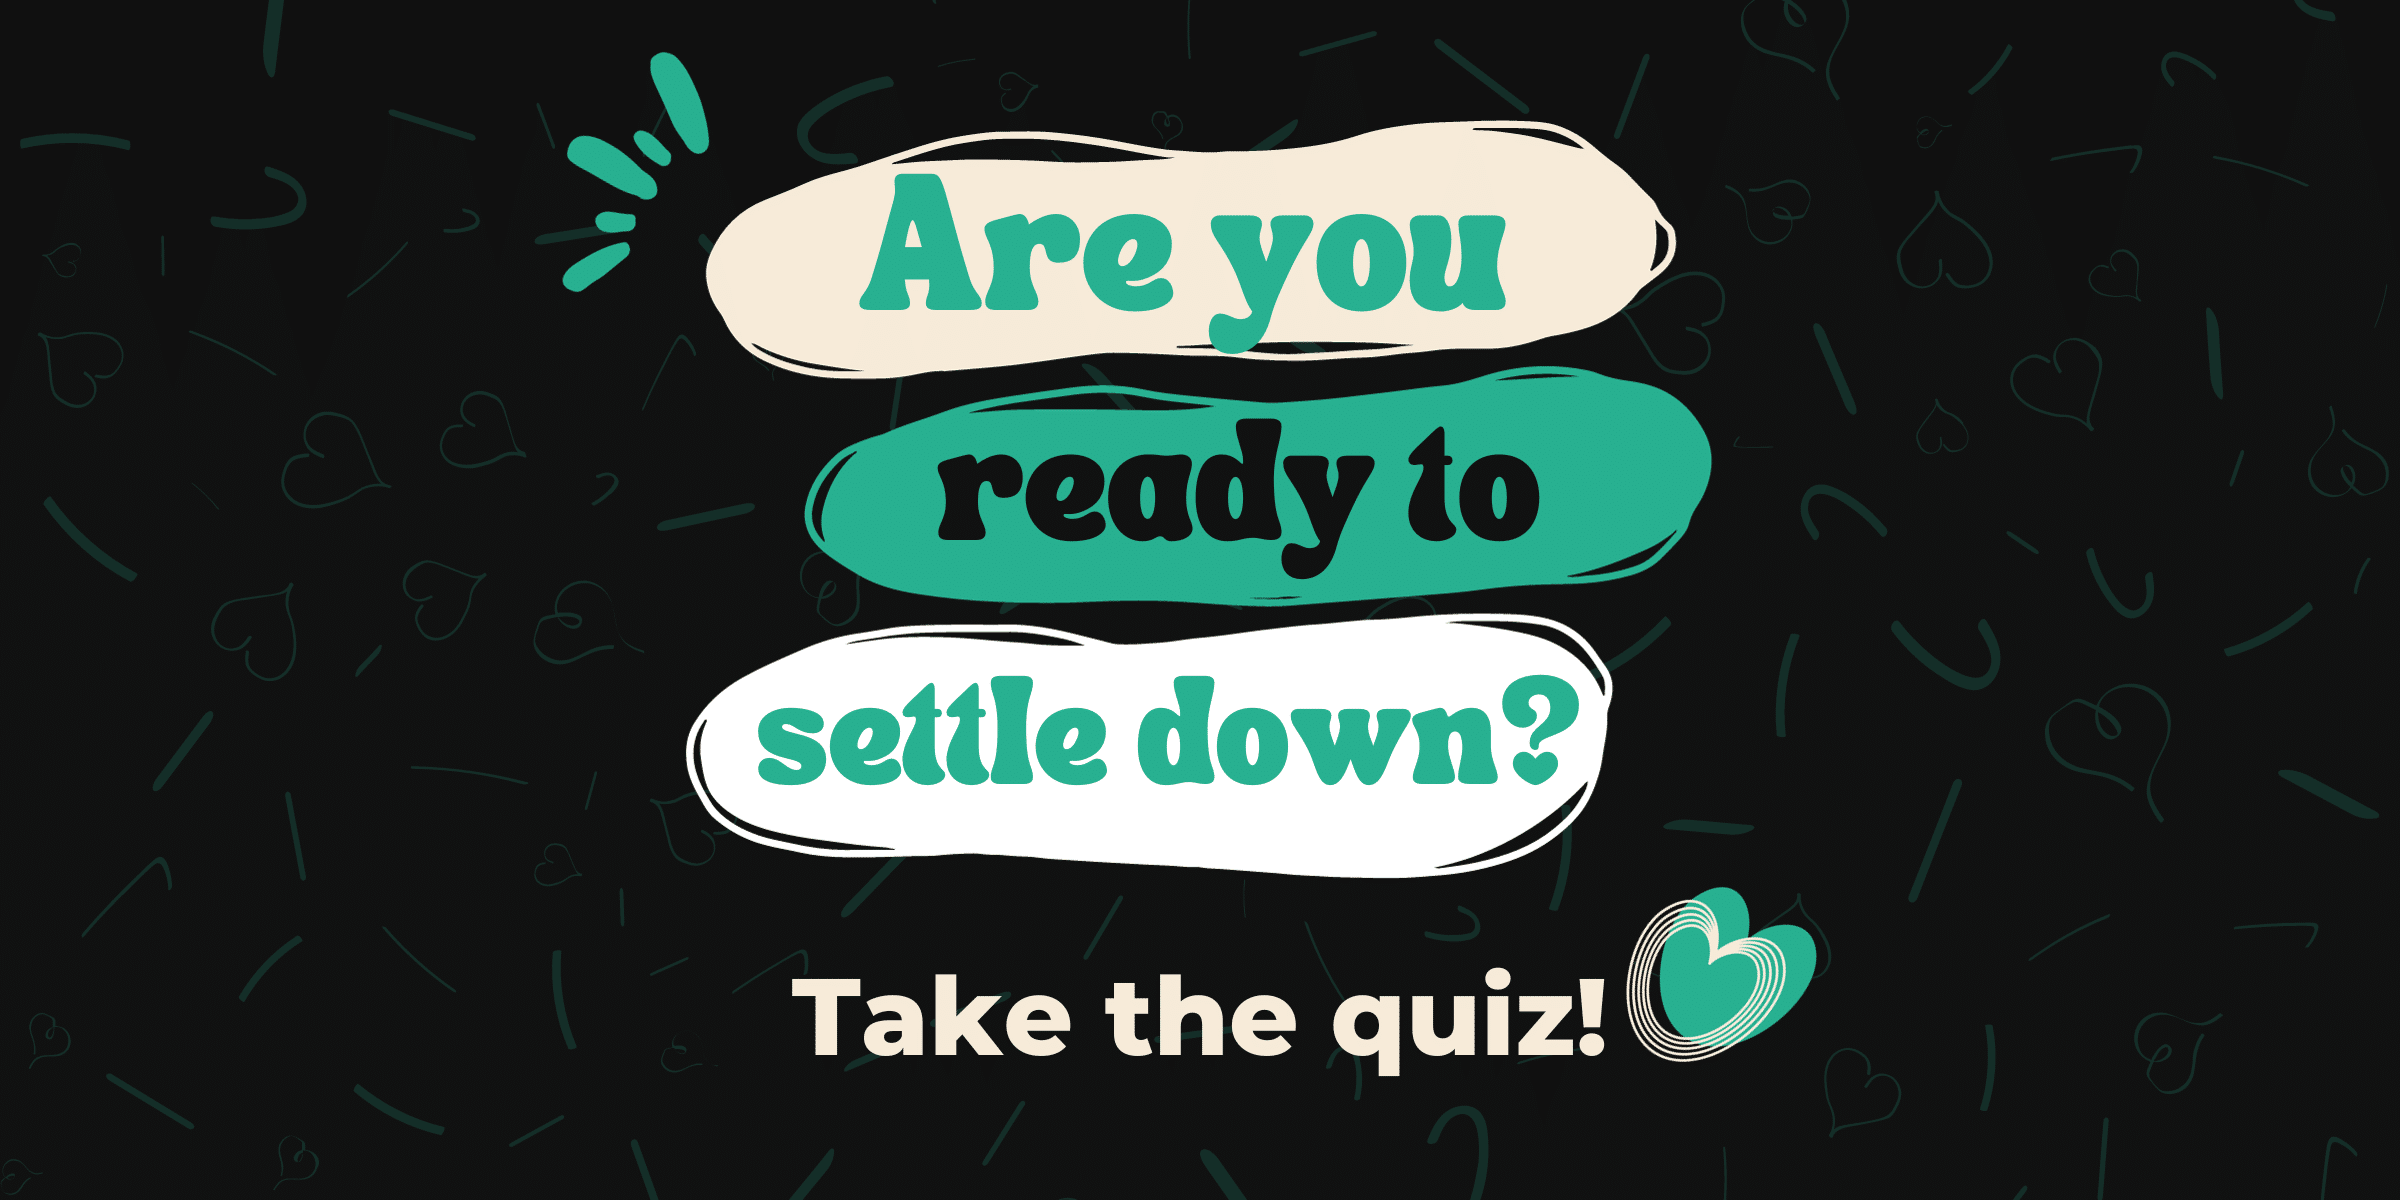 How do you know if you’re ready to settle down? Take our quiz to find out whether or not you’re prepared to settle down with someone.